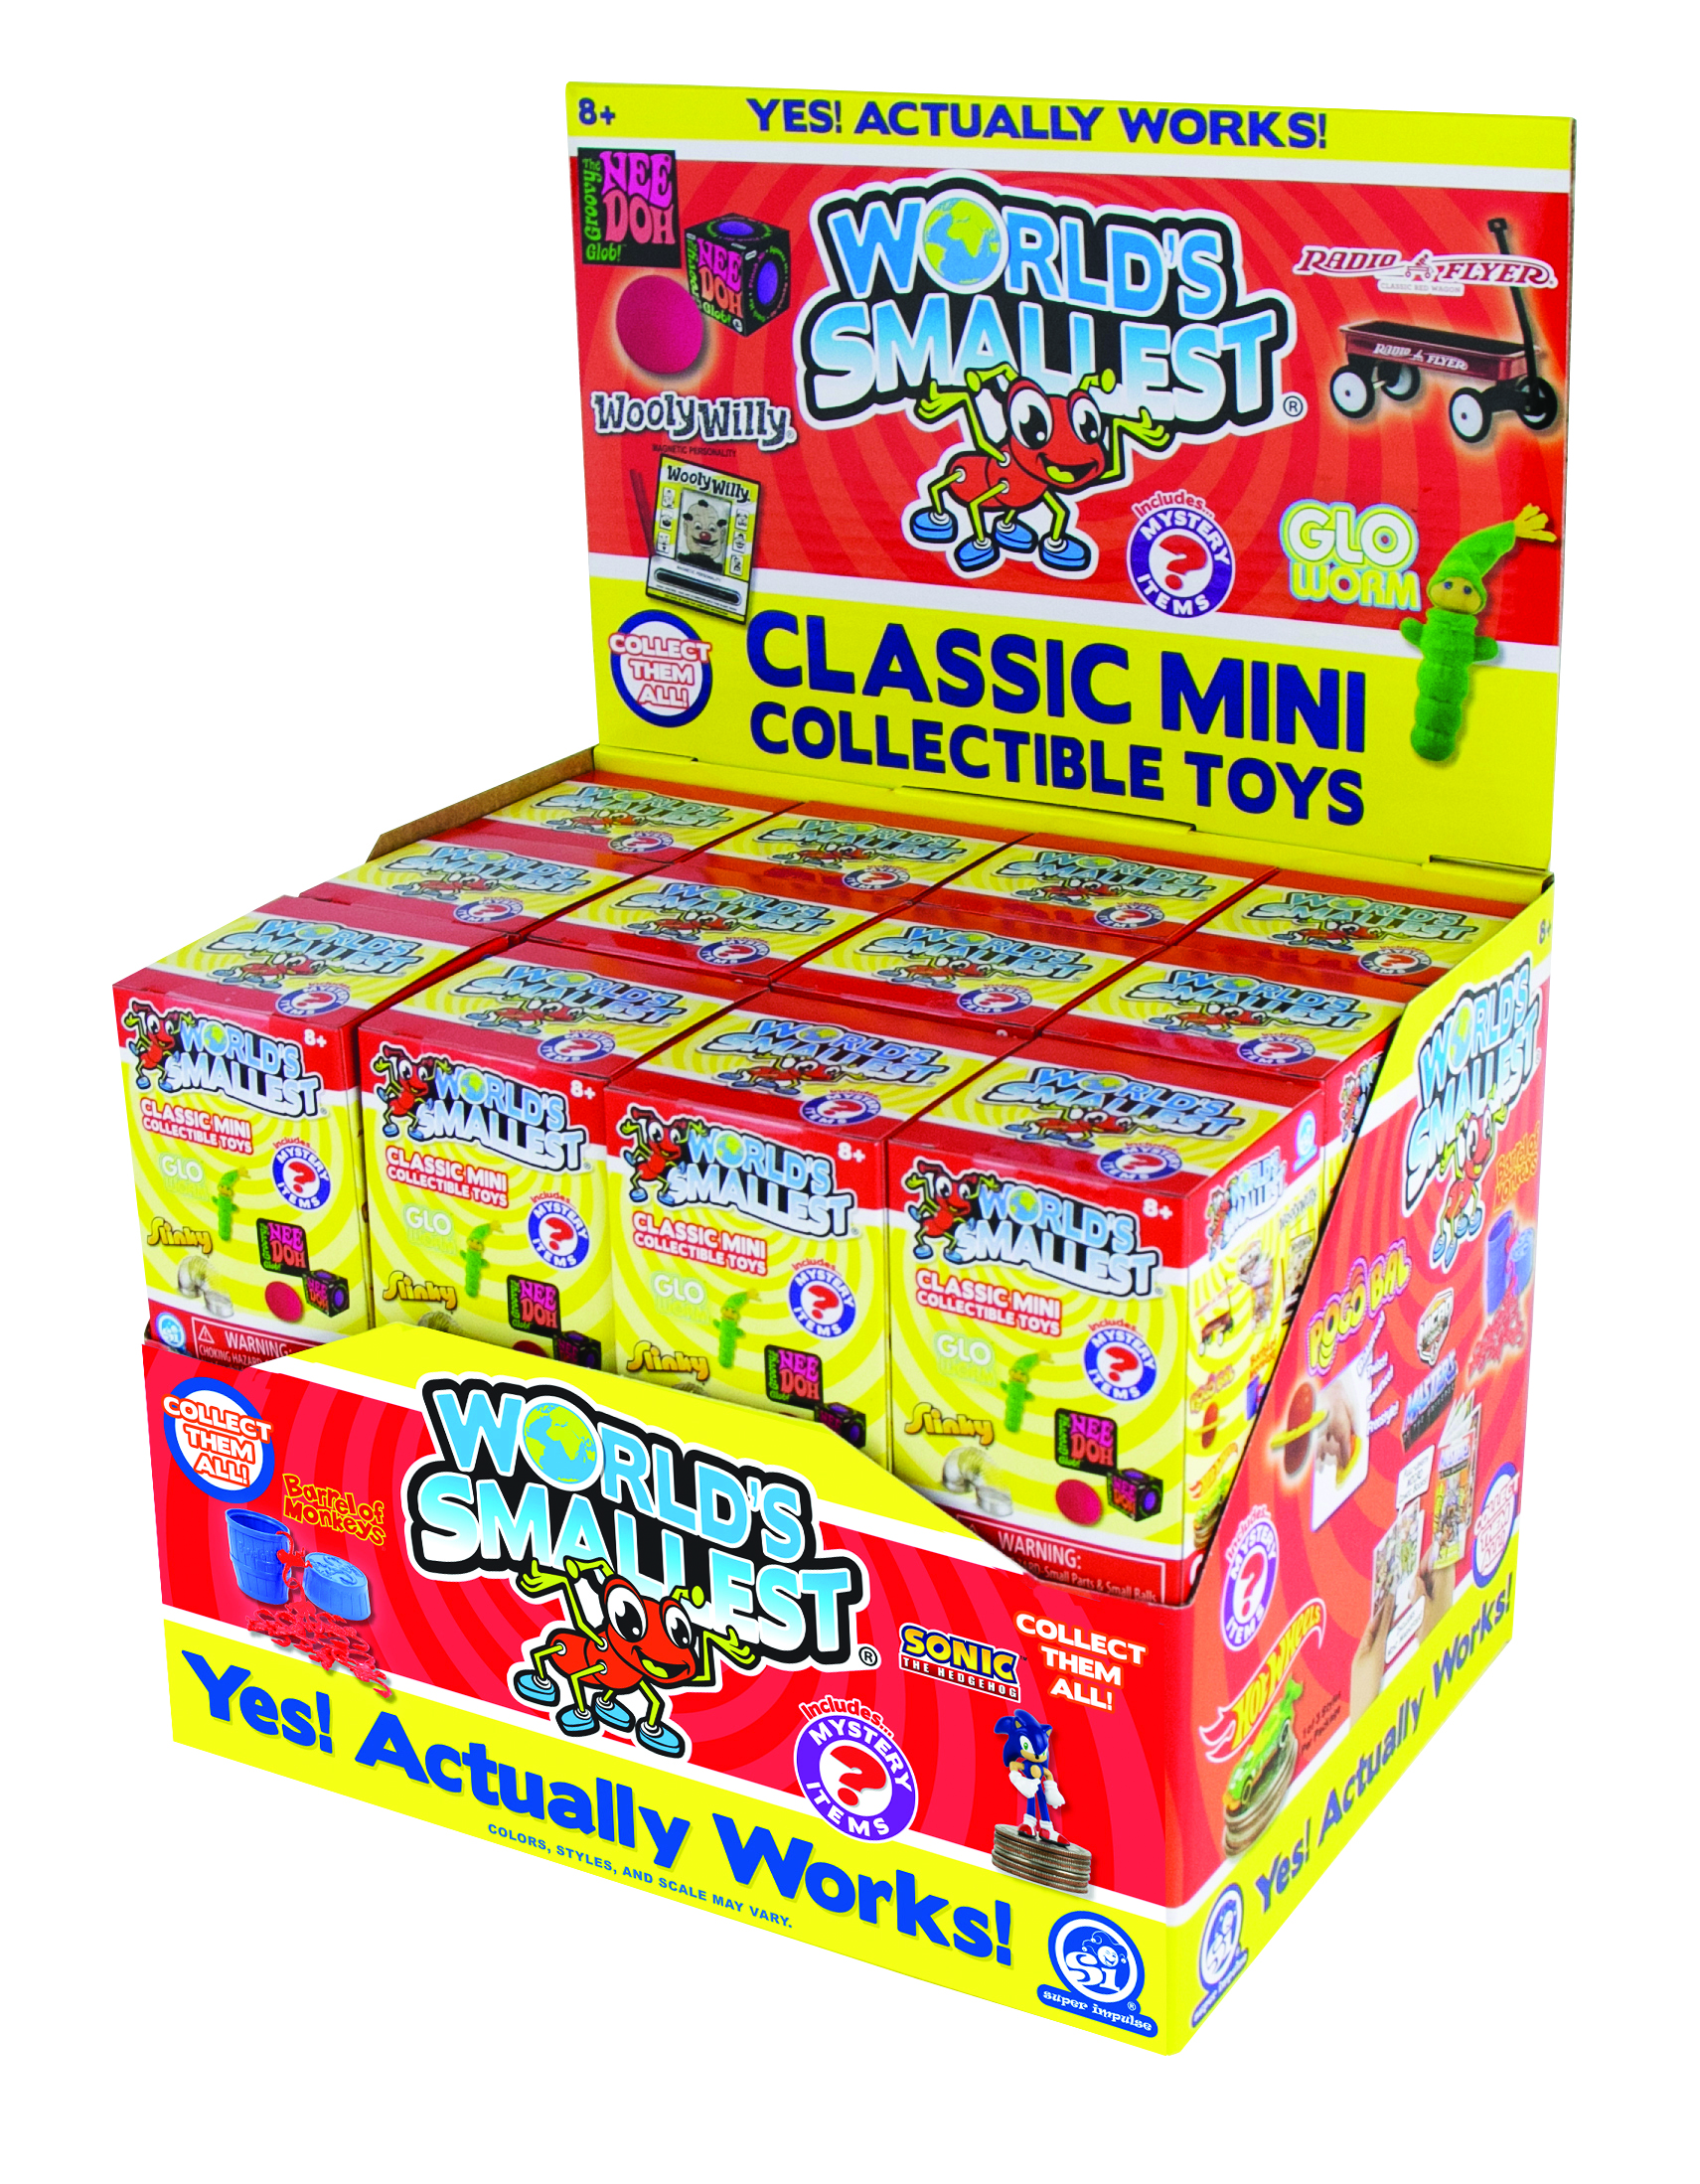 World's Smallest Mystery Box Toy, Series 3